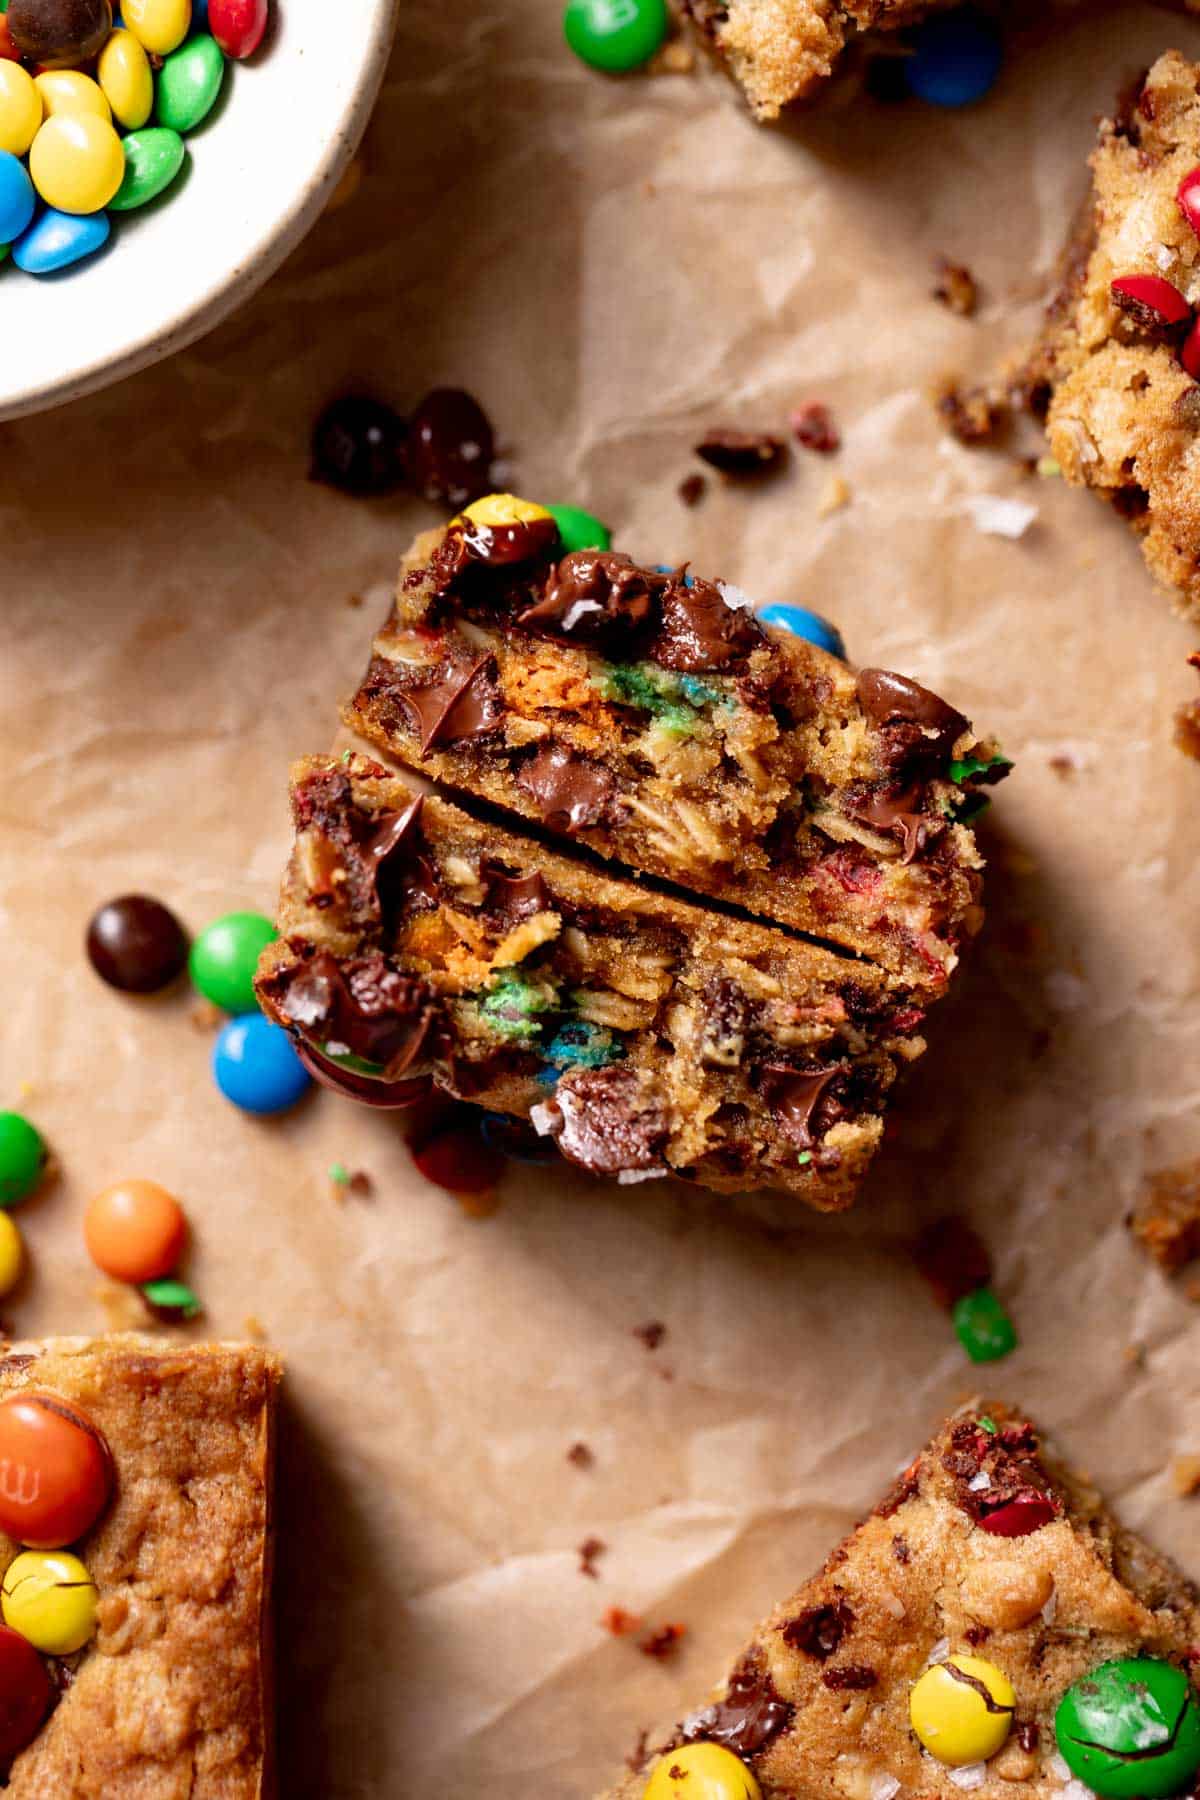 A cookie bar broken in half to show the chewy oatmeal texture.